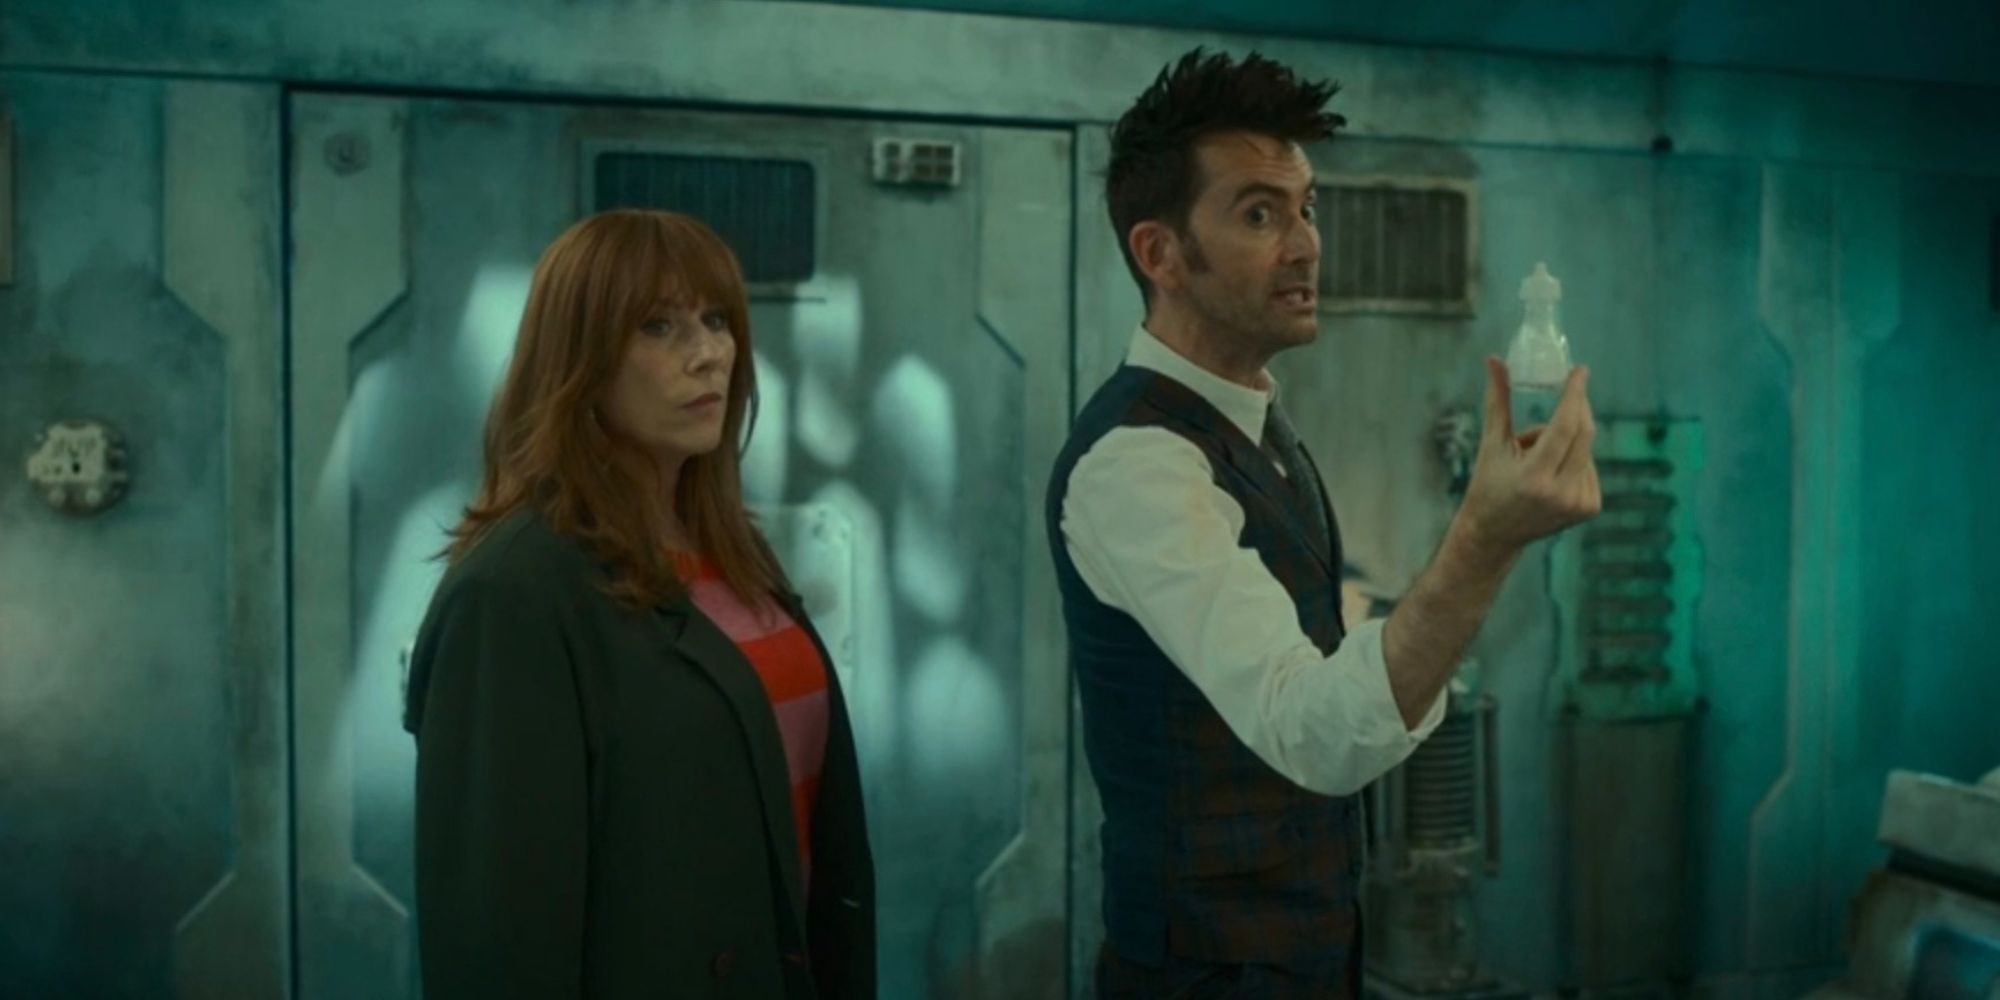 Catherine Tate as Donna Noble and David Tennant as the Doctor in Doctor Who Wild Blue Yonder, the Doctor is holding a salt shaker